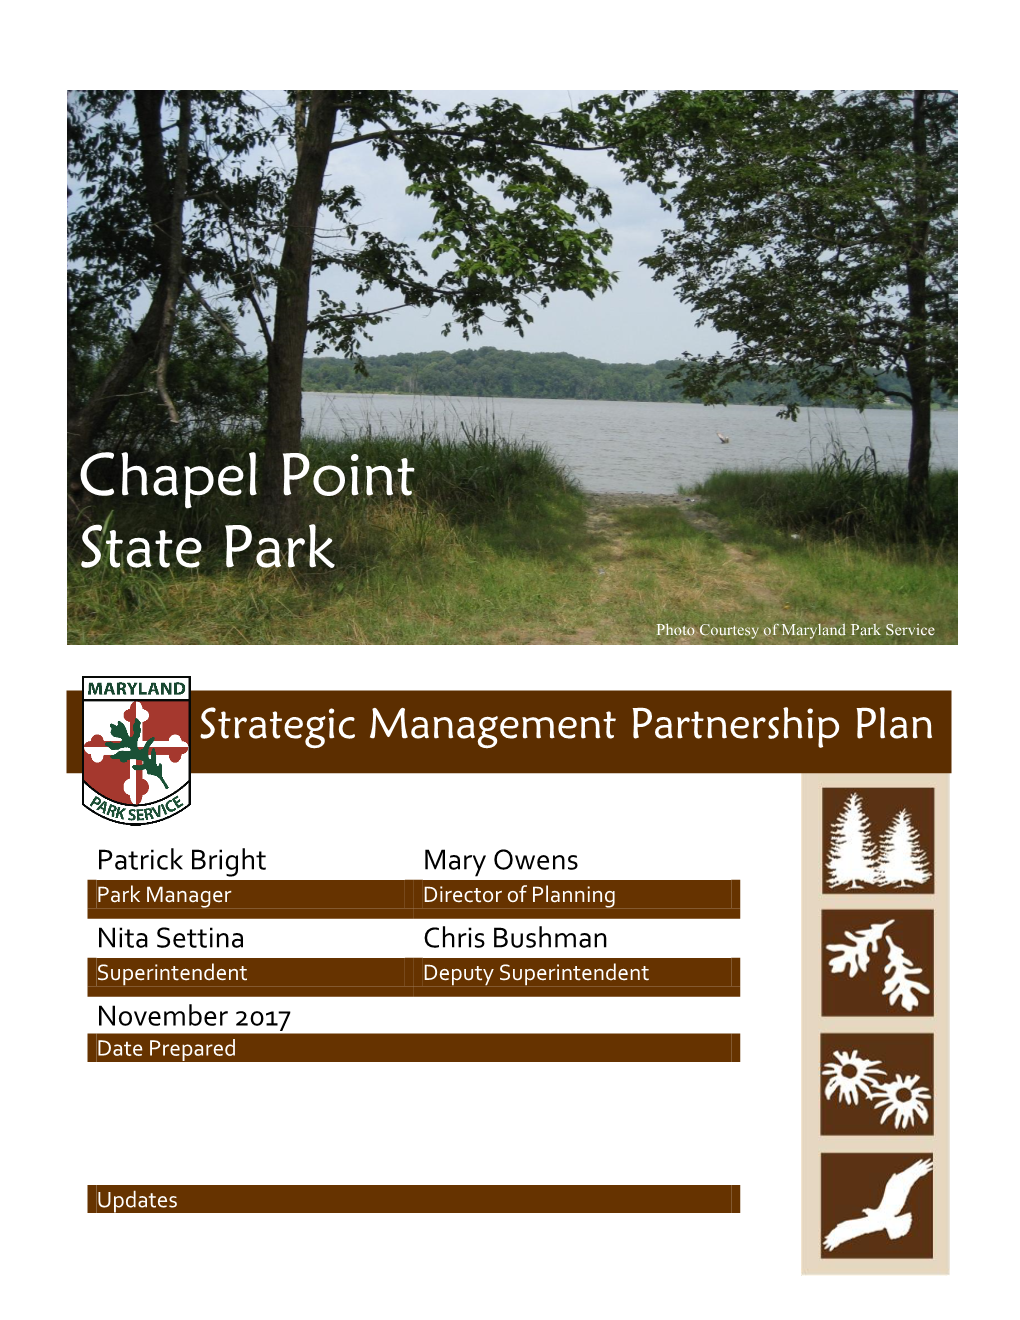 Chapel Point State Park